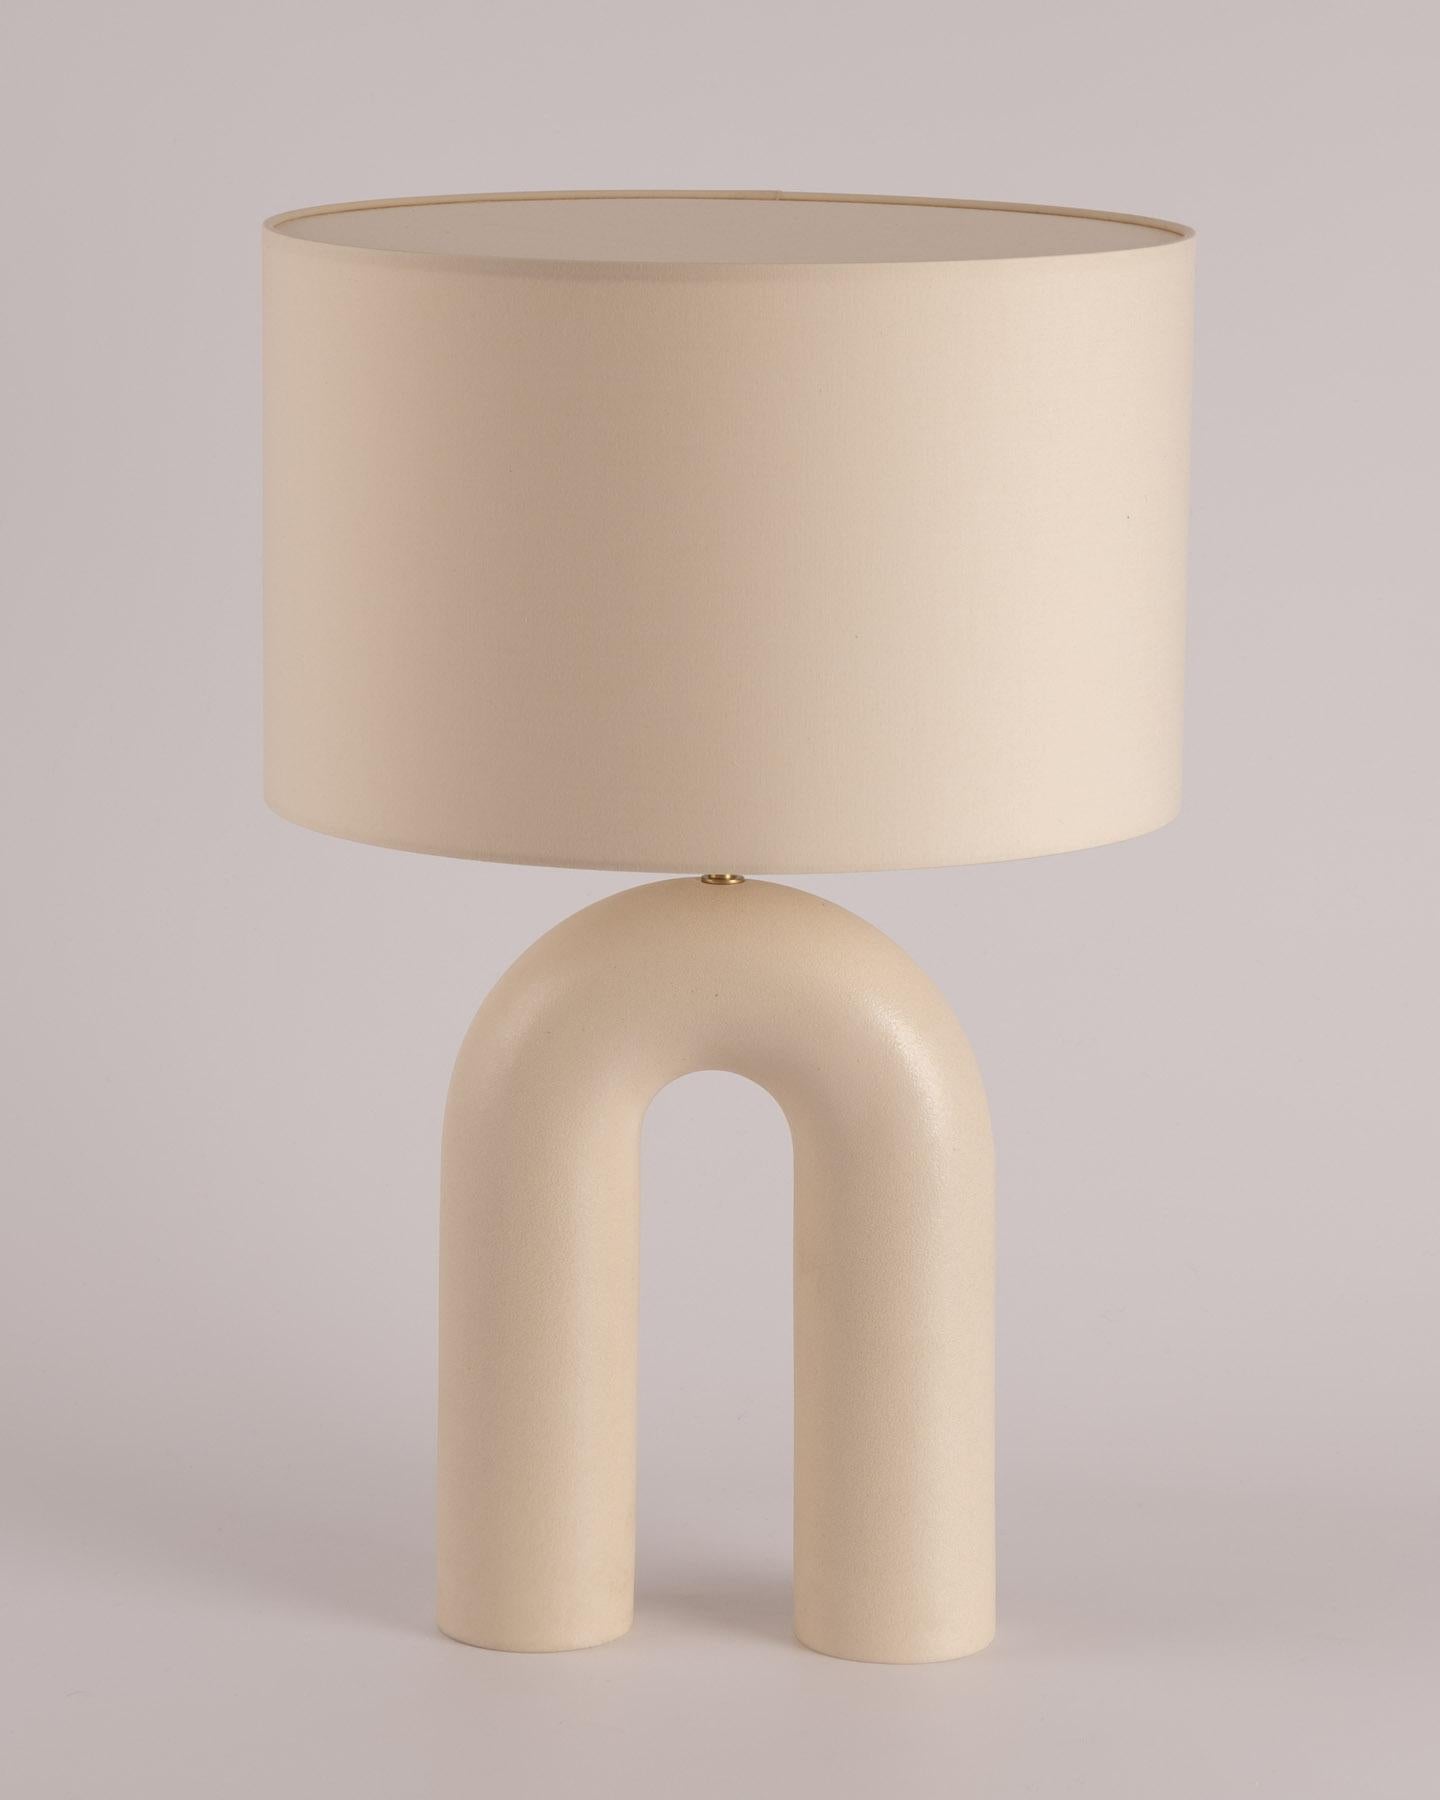 Spanish Ecru Ceramic Arko Table Lamp with Light Brown Lampshade by Simone & Marcel For Sale